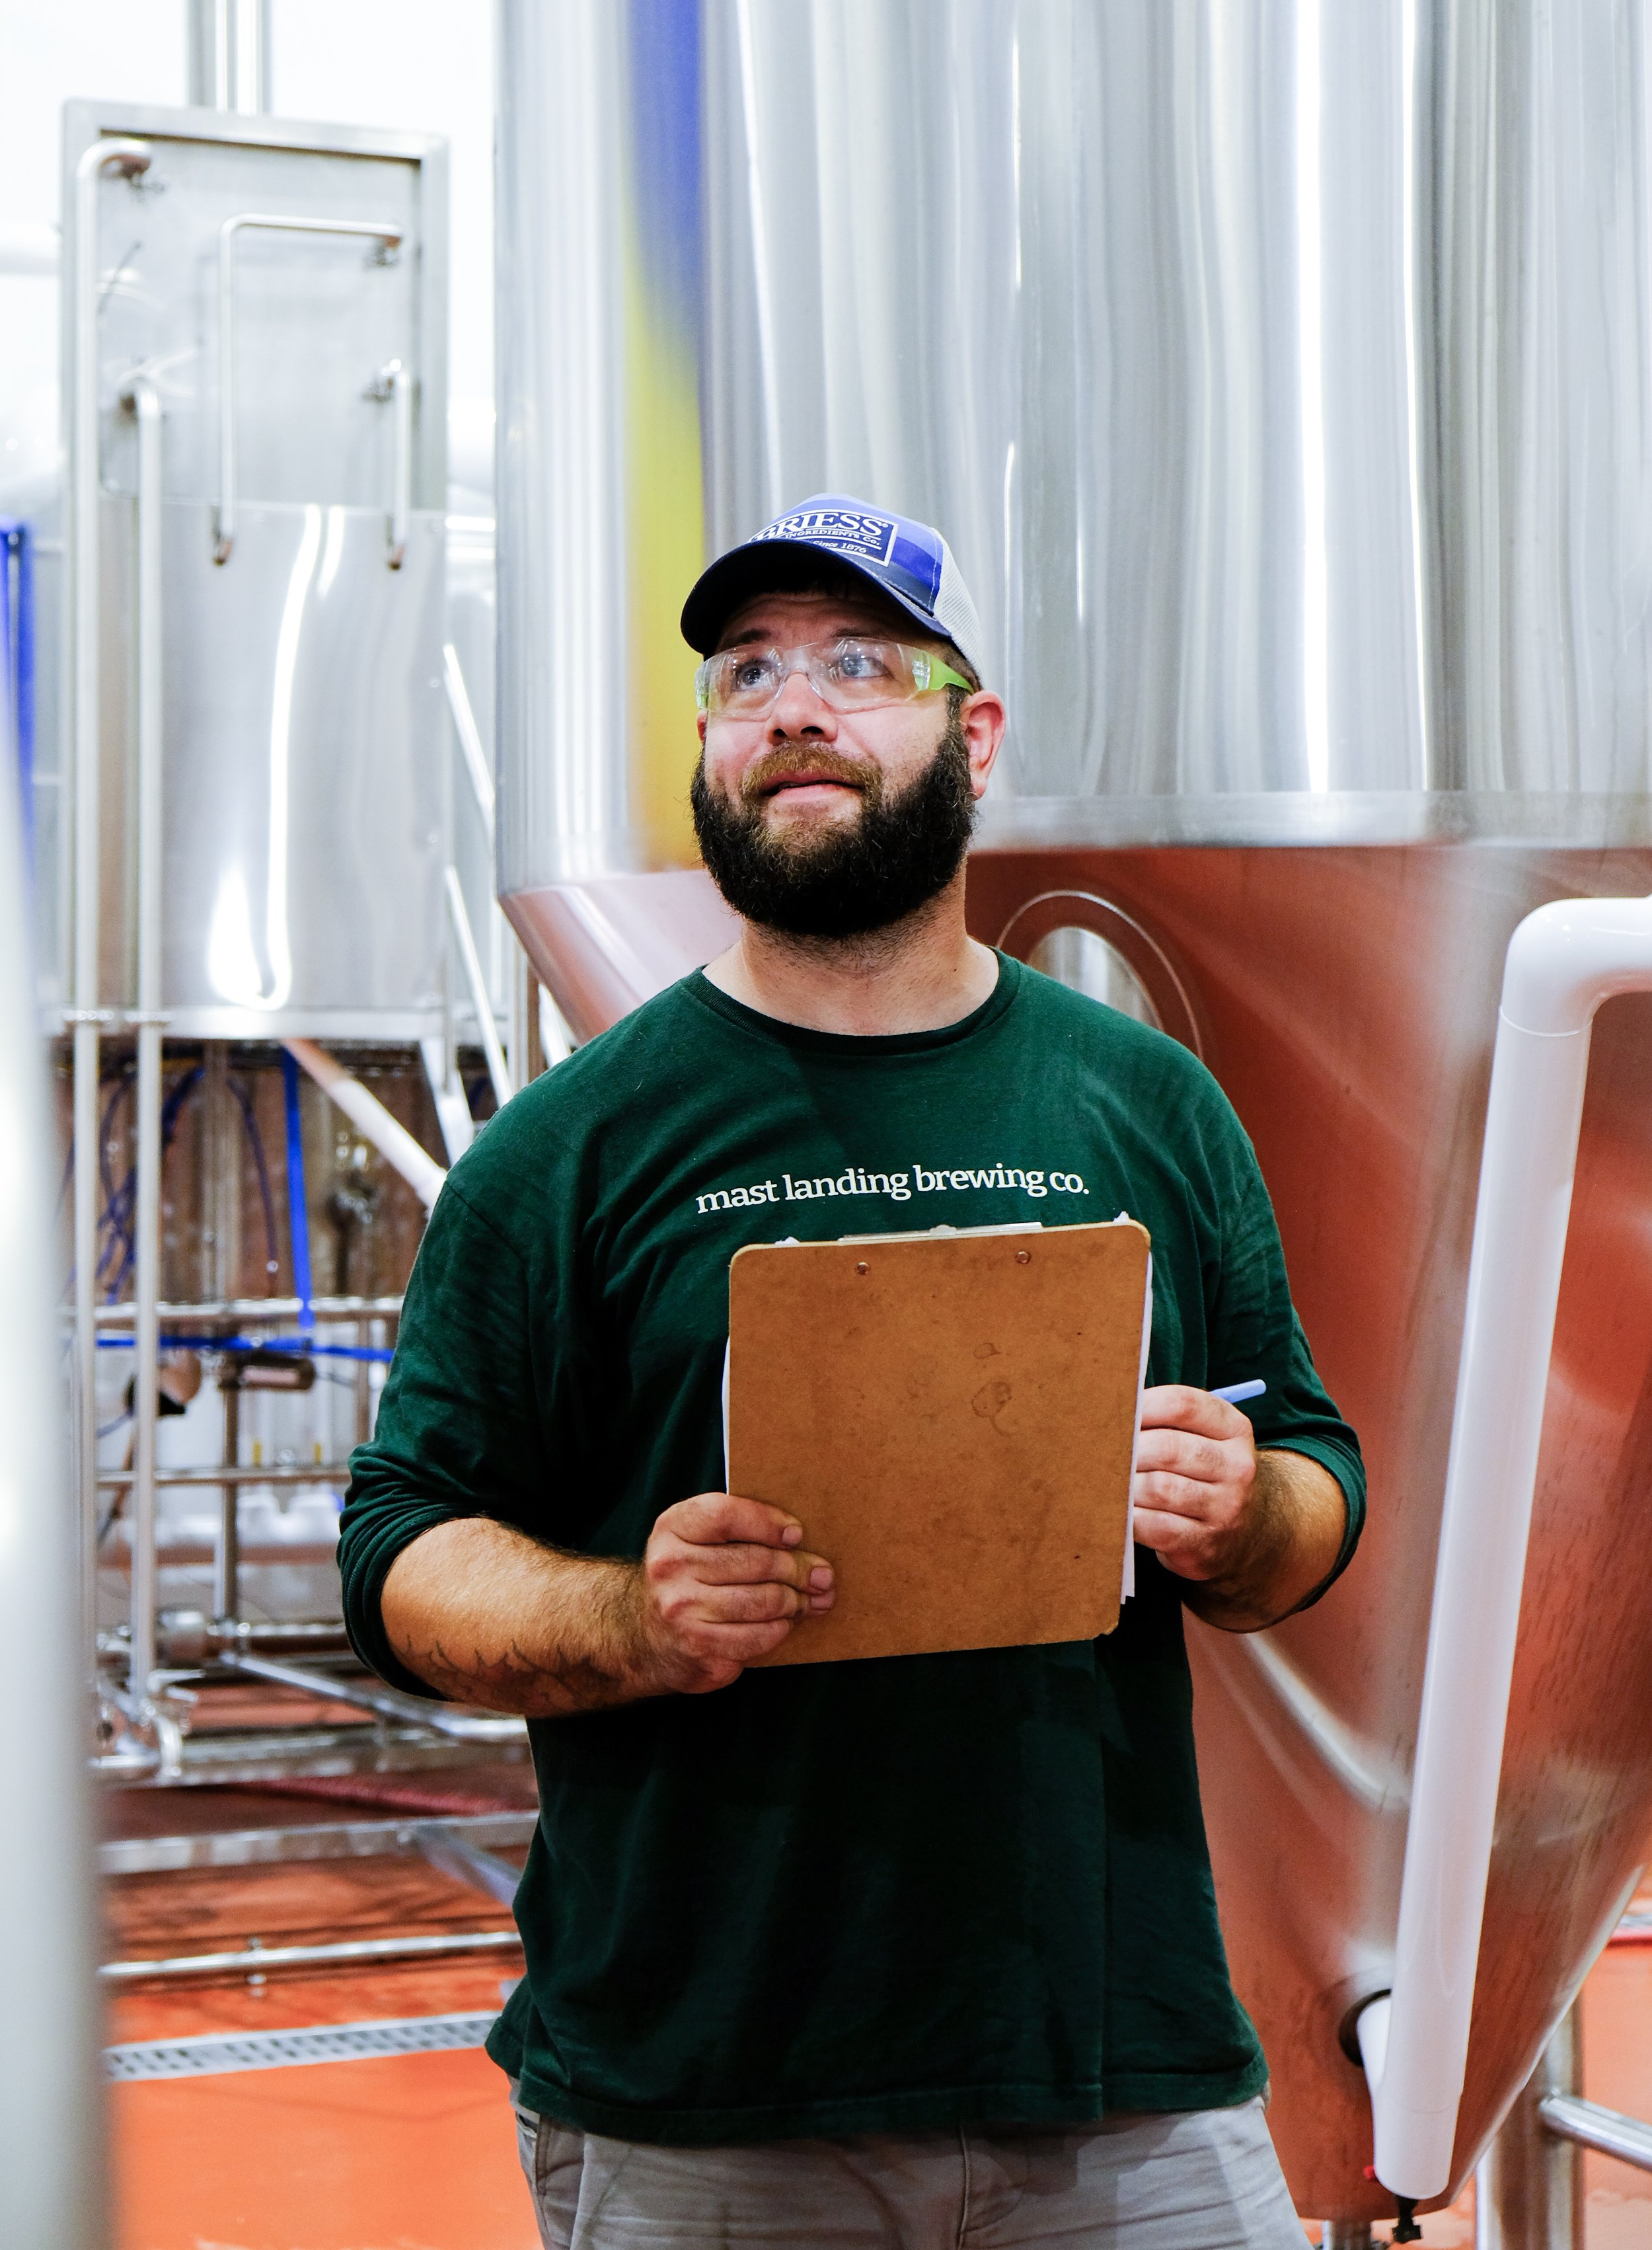  andrew working in the westbrook brewery 